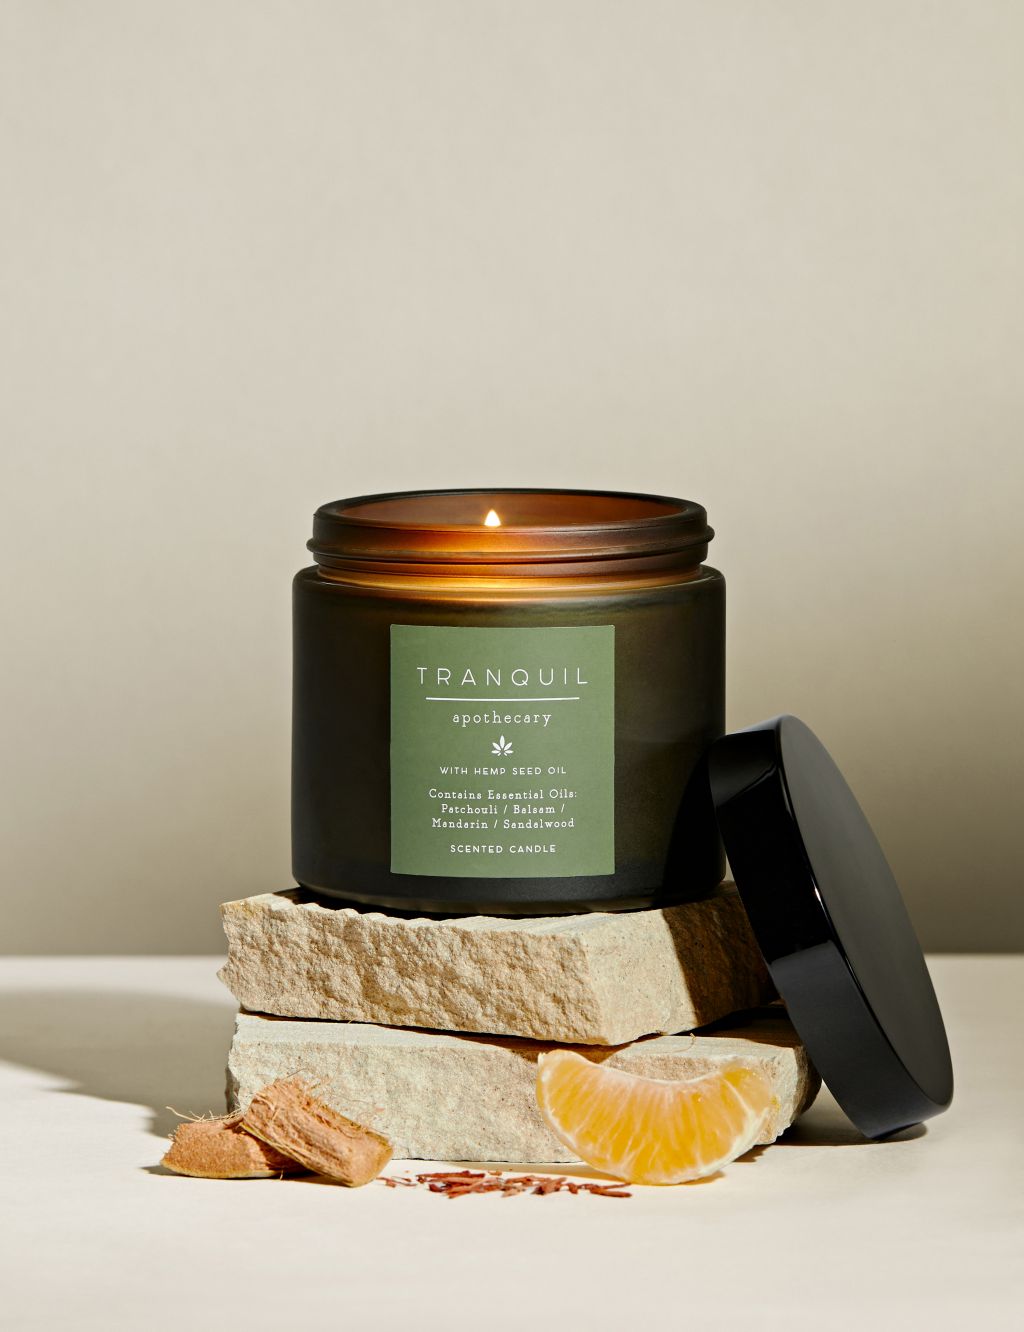 Tranquil Scented Candle image 1